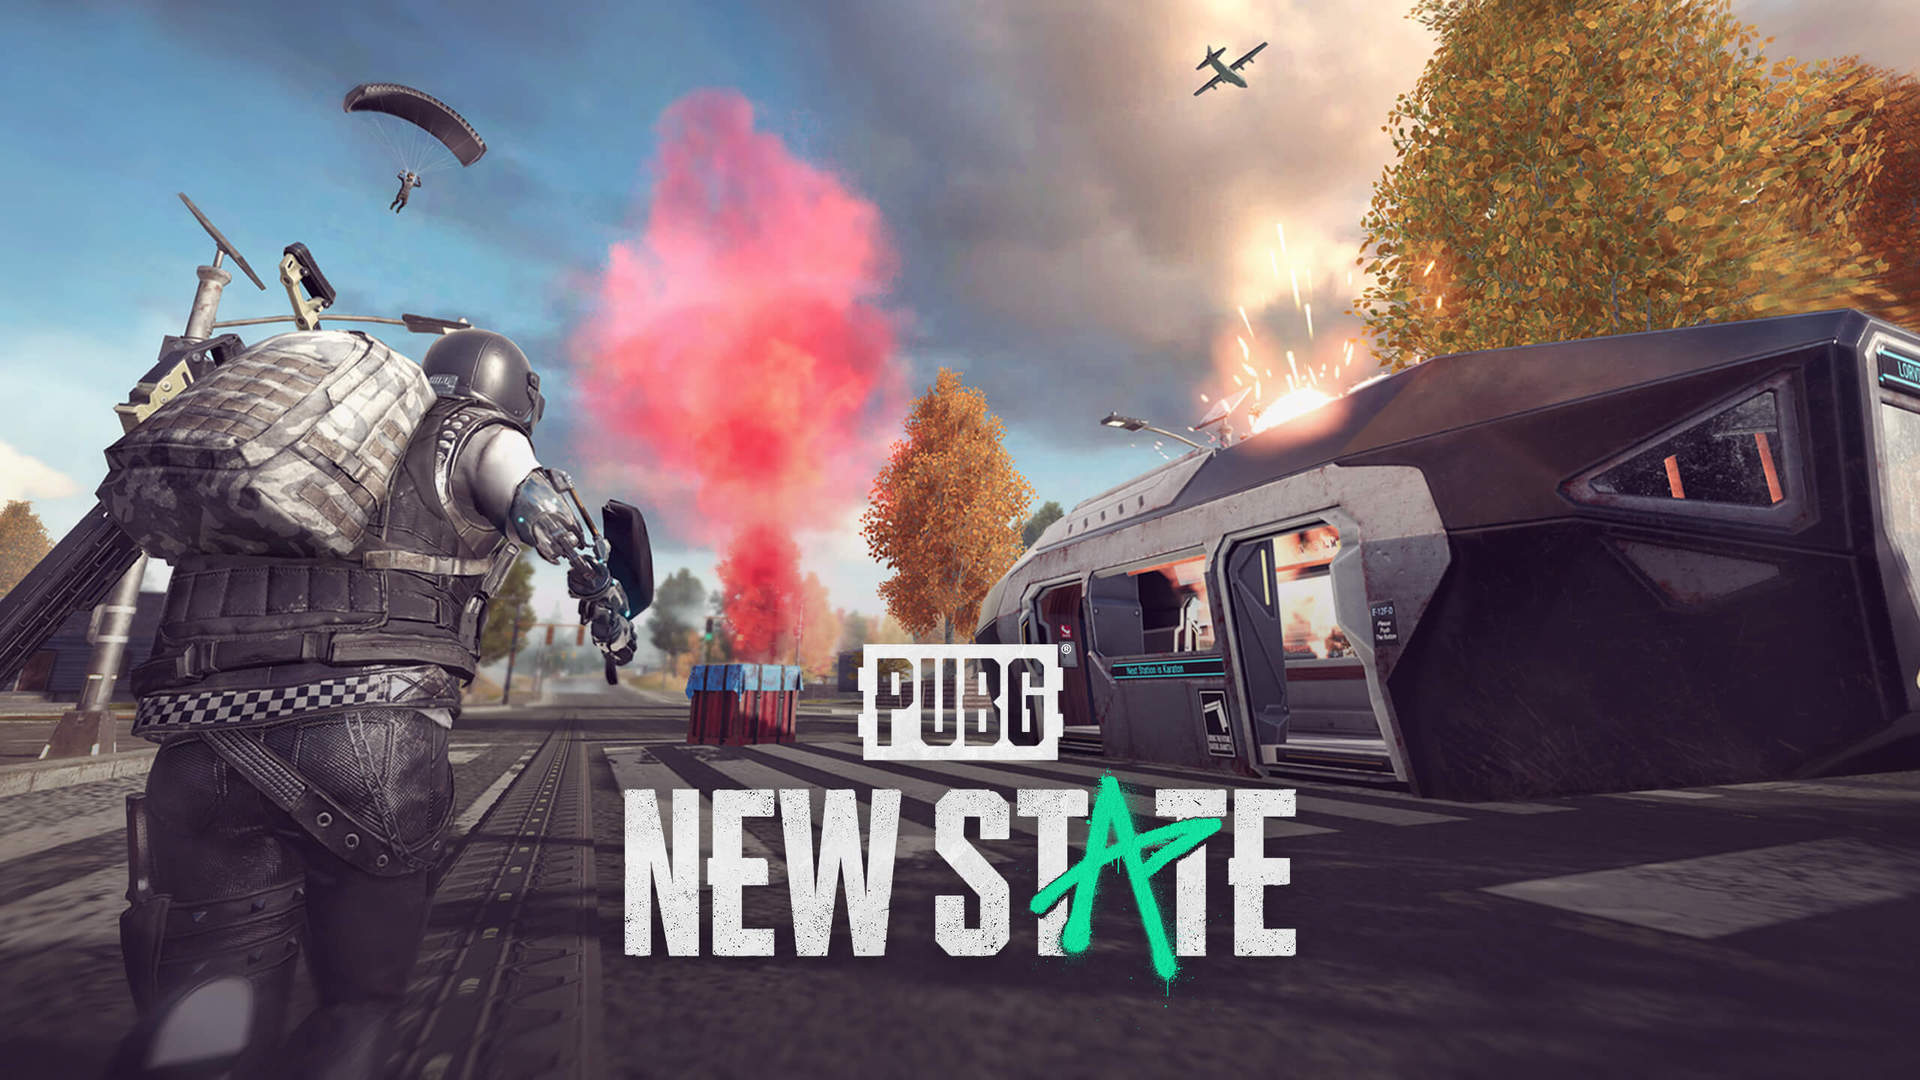 PUBG New State Official PR Image 2